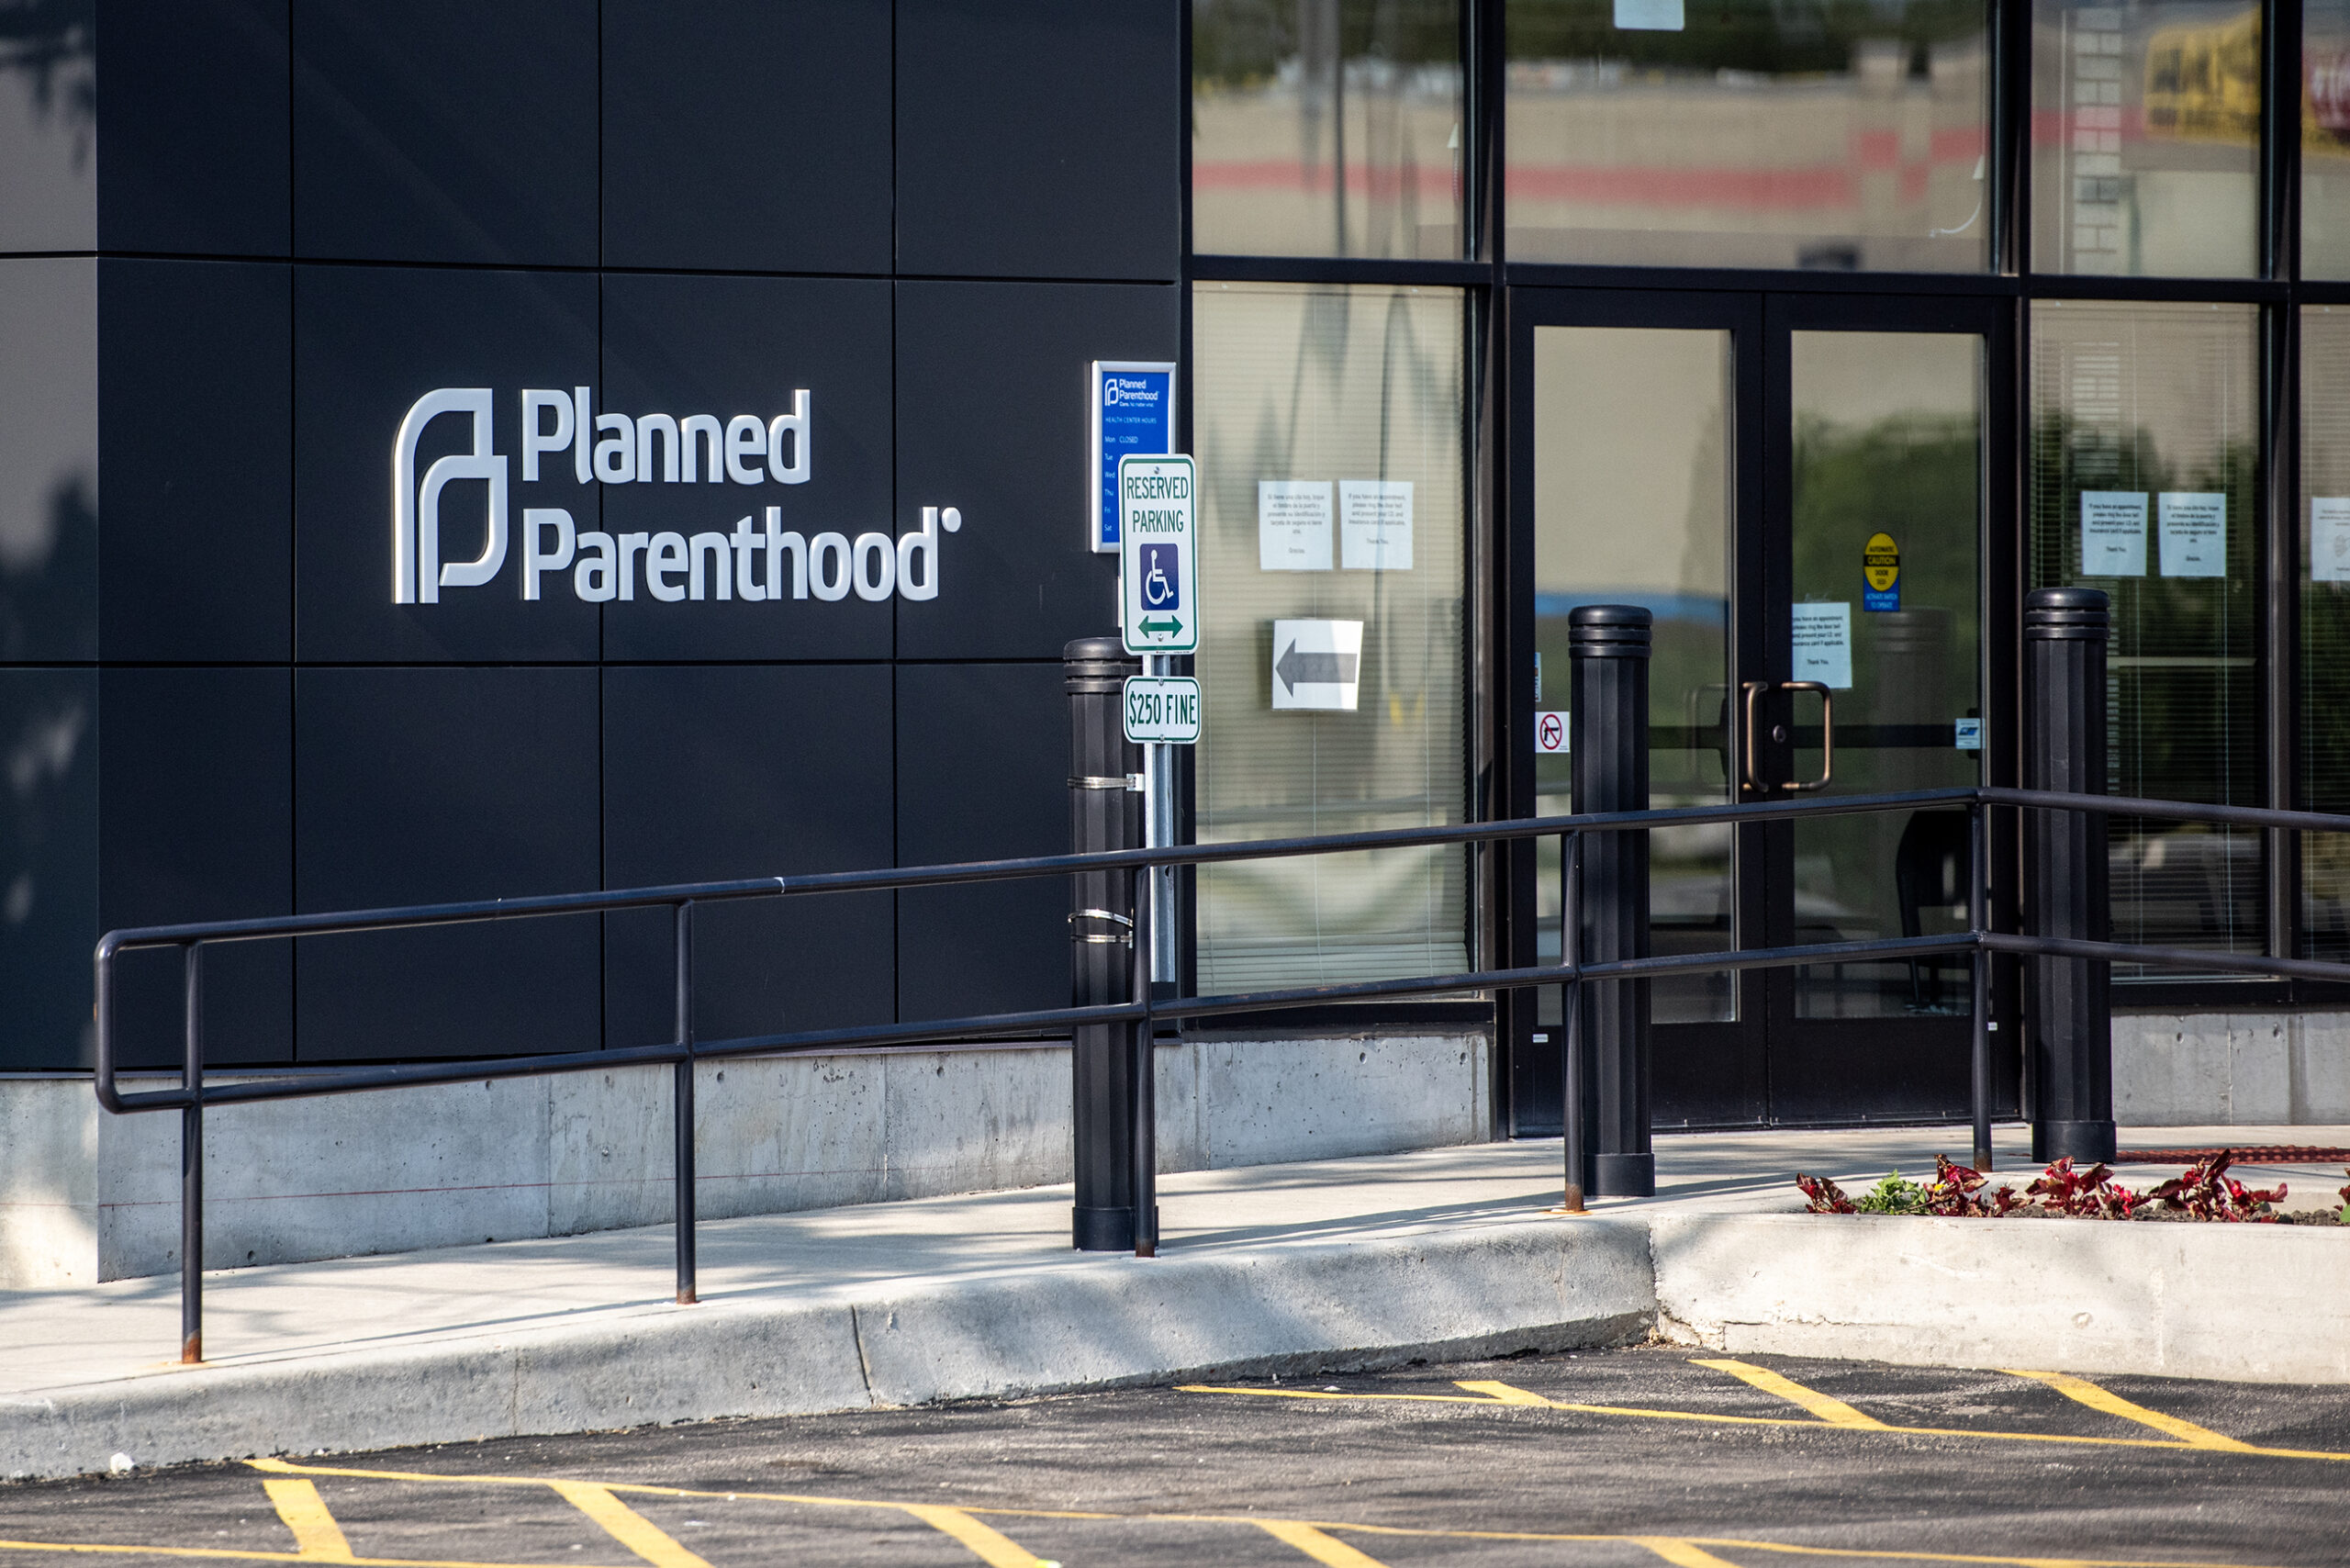 A Planned Parenthood sign is displayed on the exterior of a building.